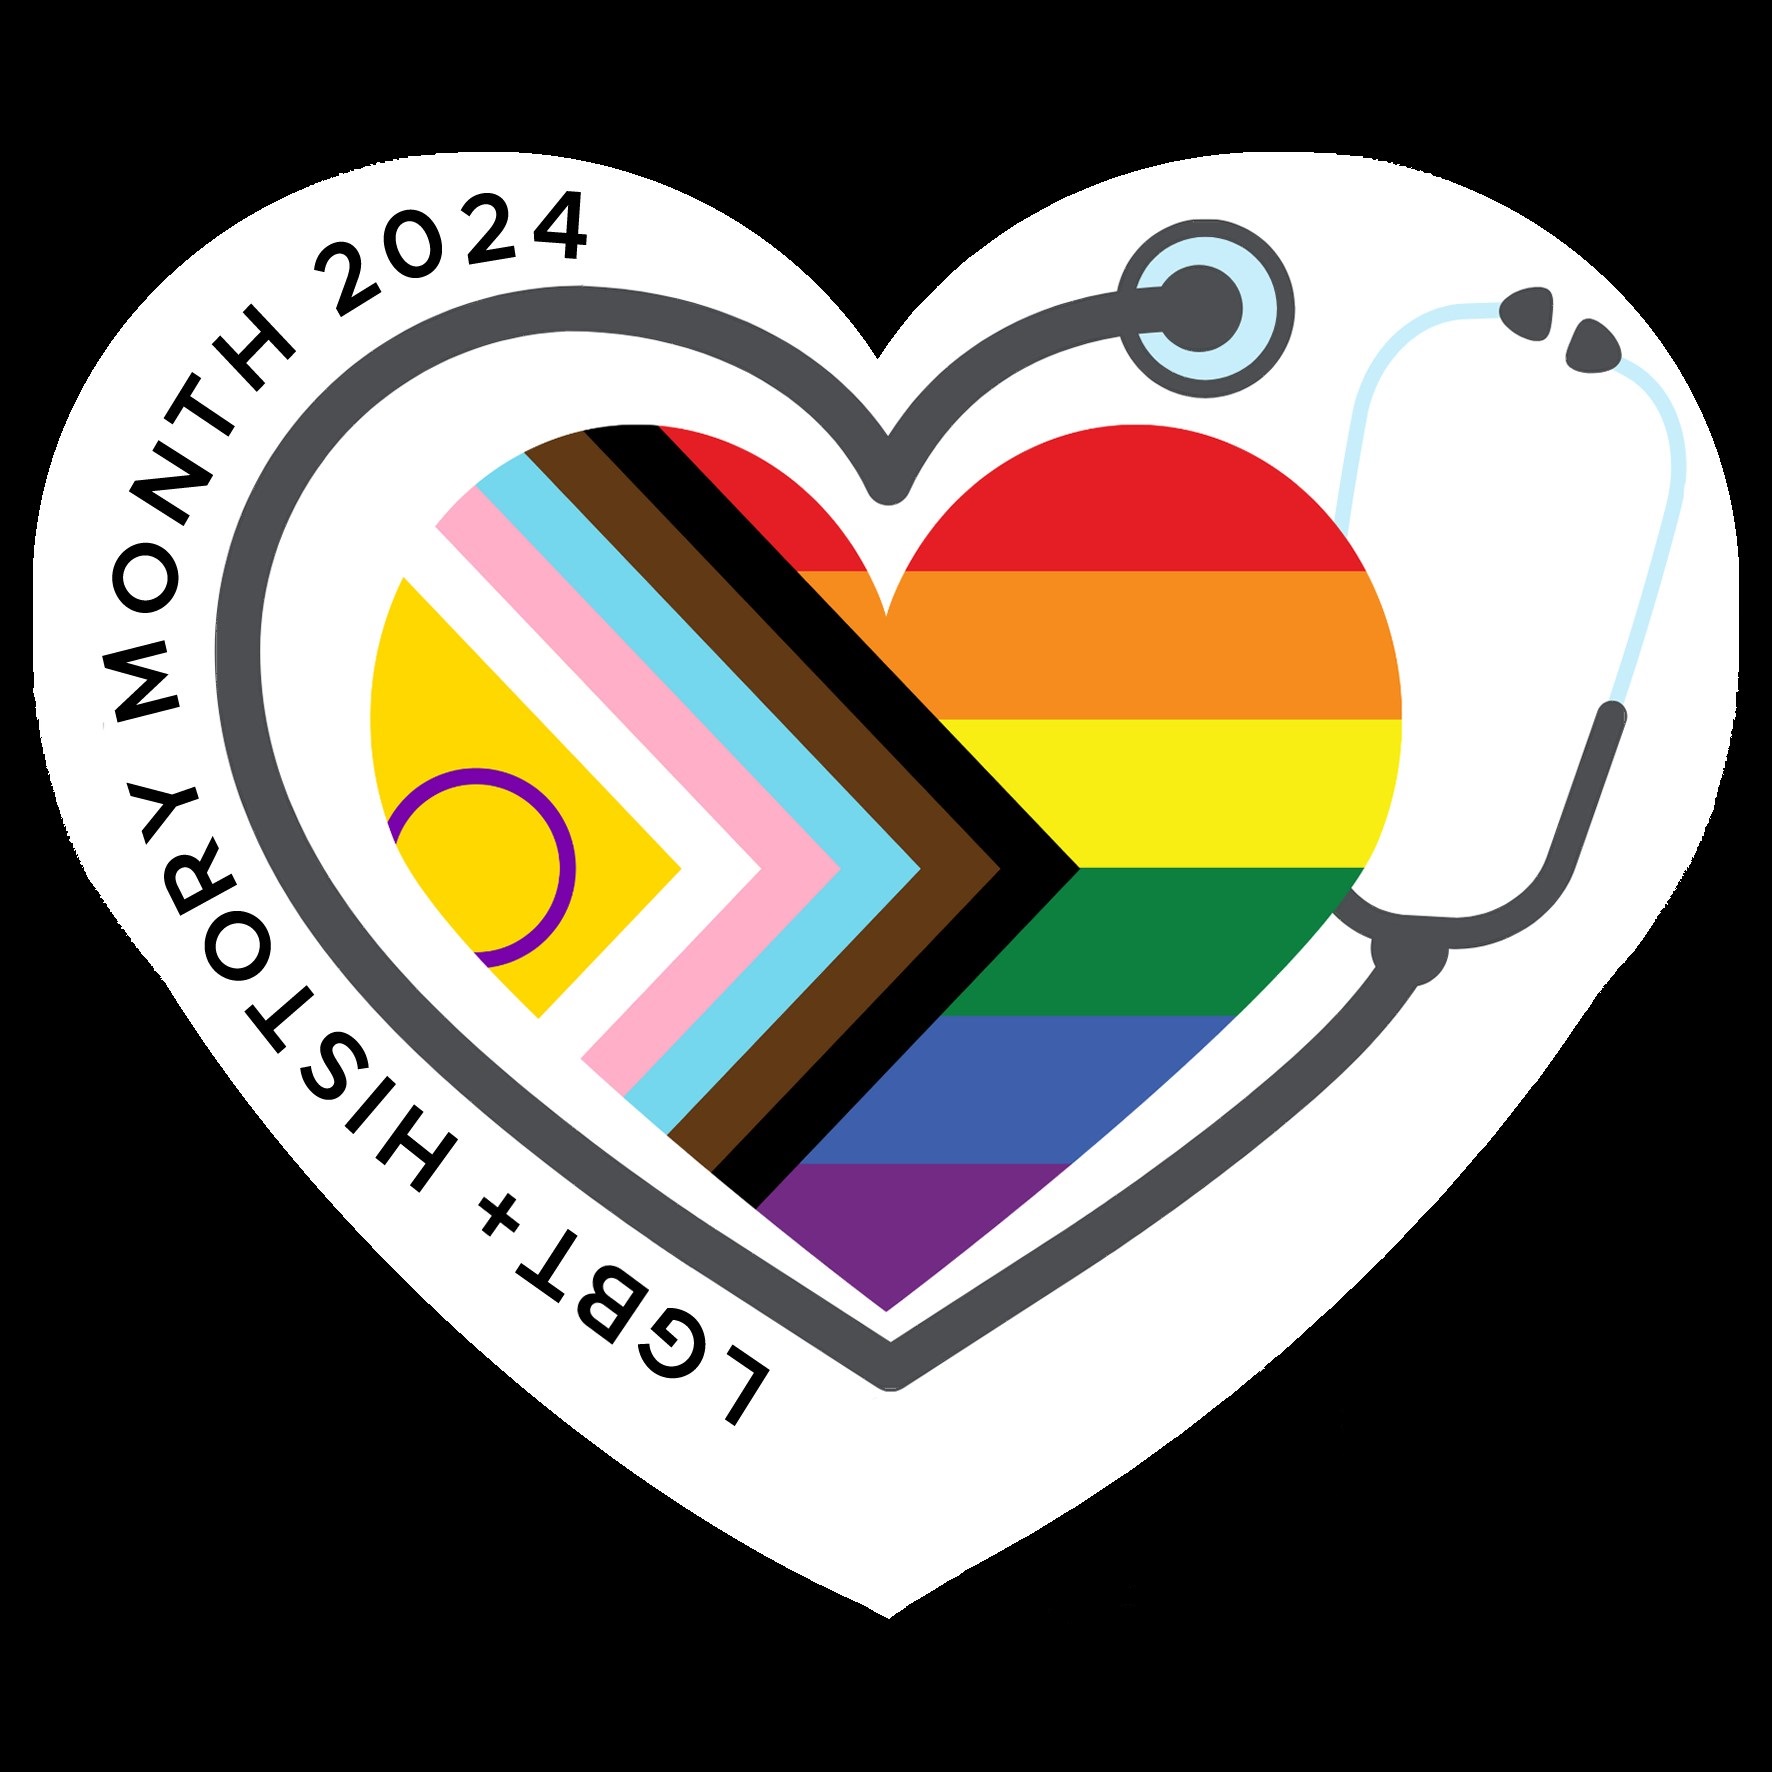 A heart shaped logo with the Intersex Inclusive Progress Pride flag inside, surrounded by a stethoscope